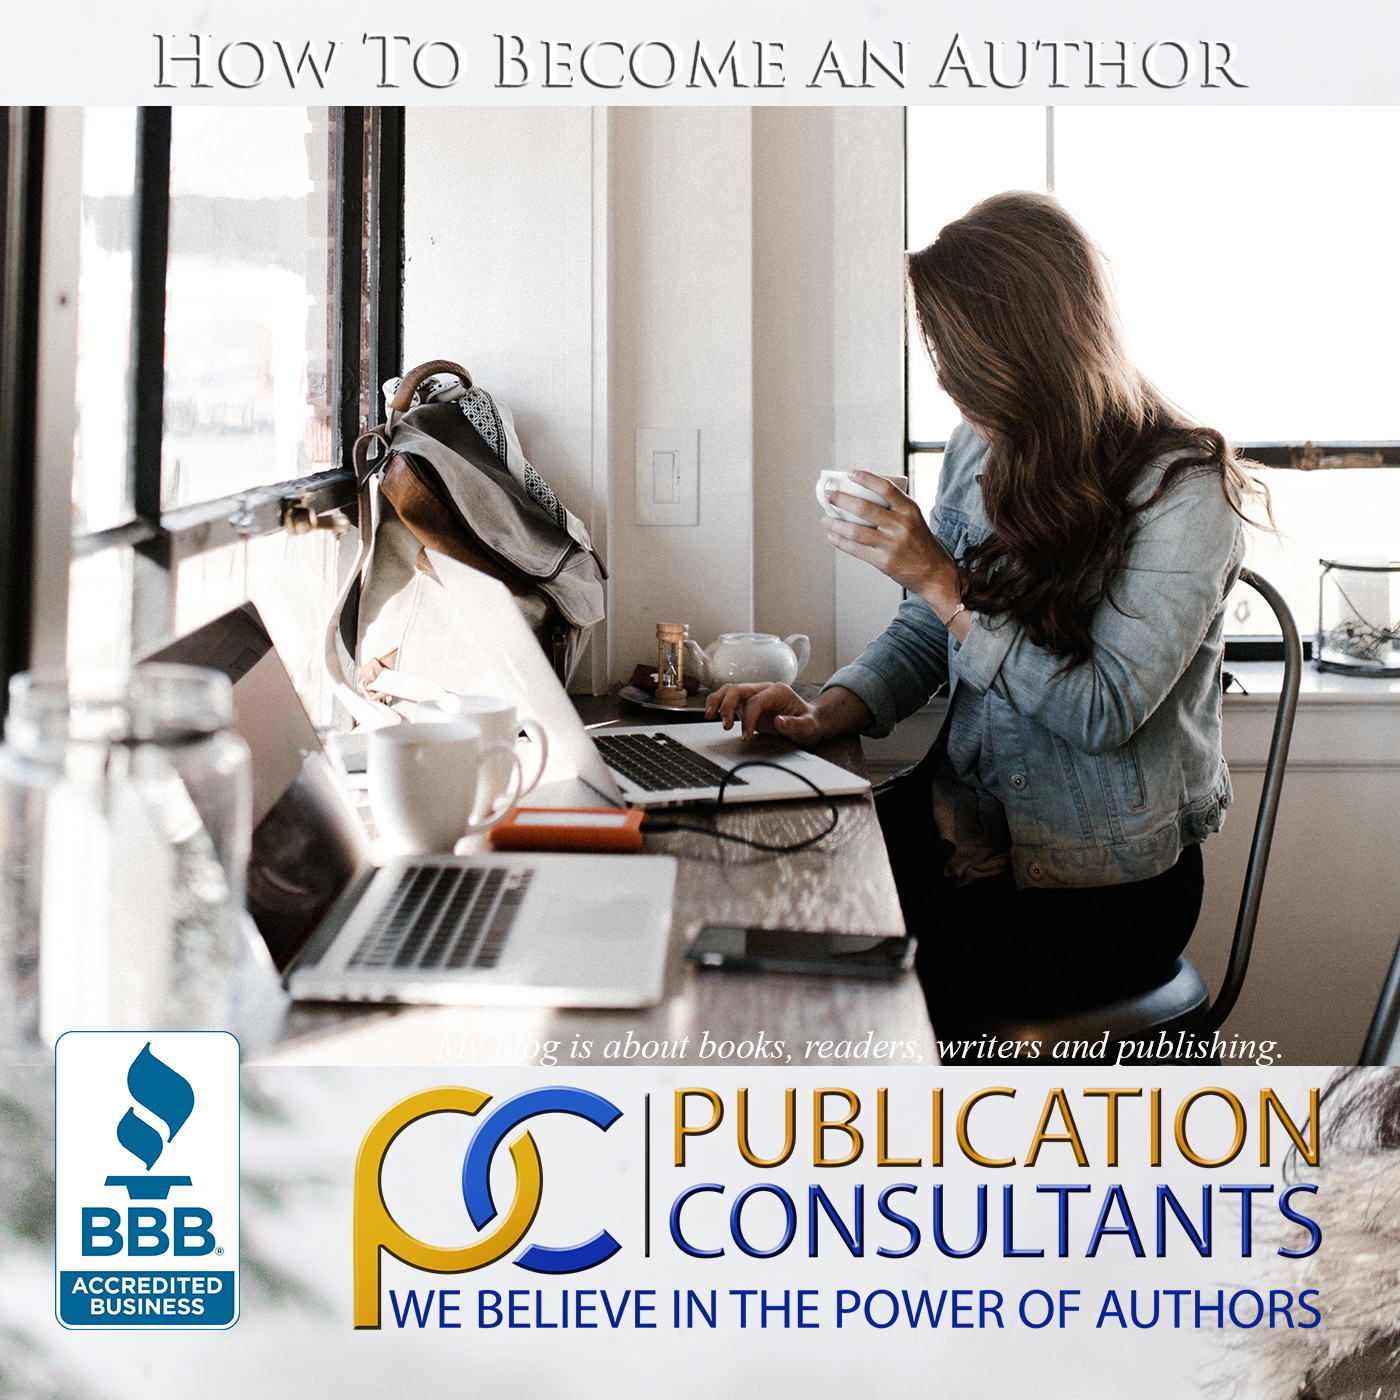 How To Become an Author